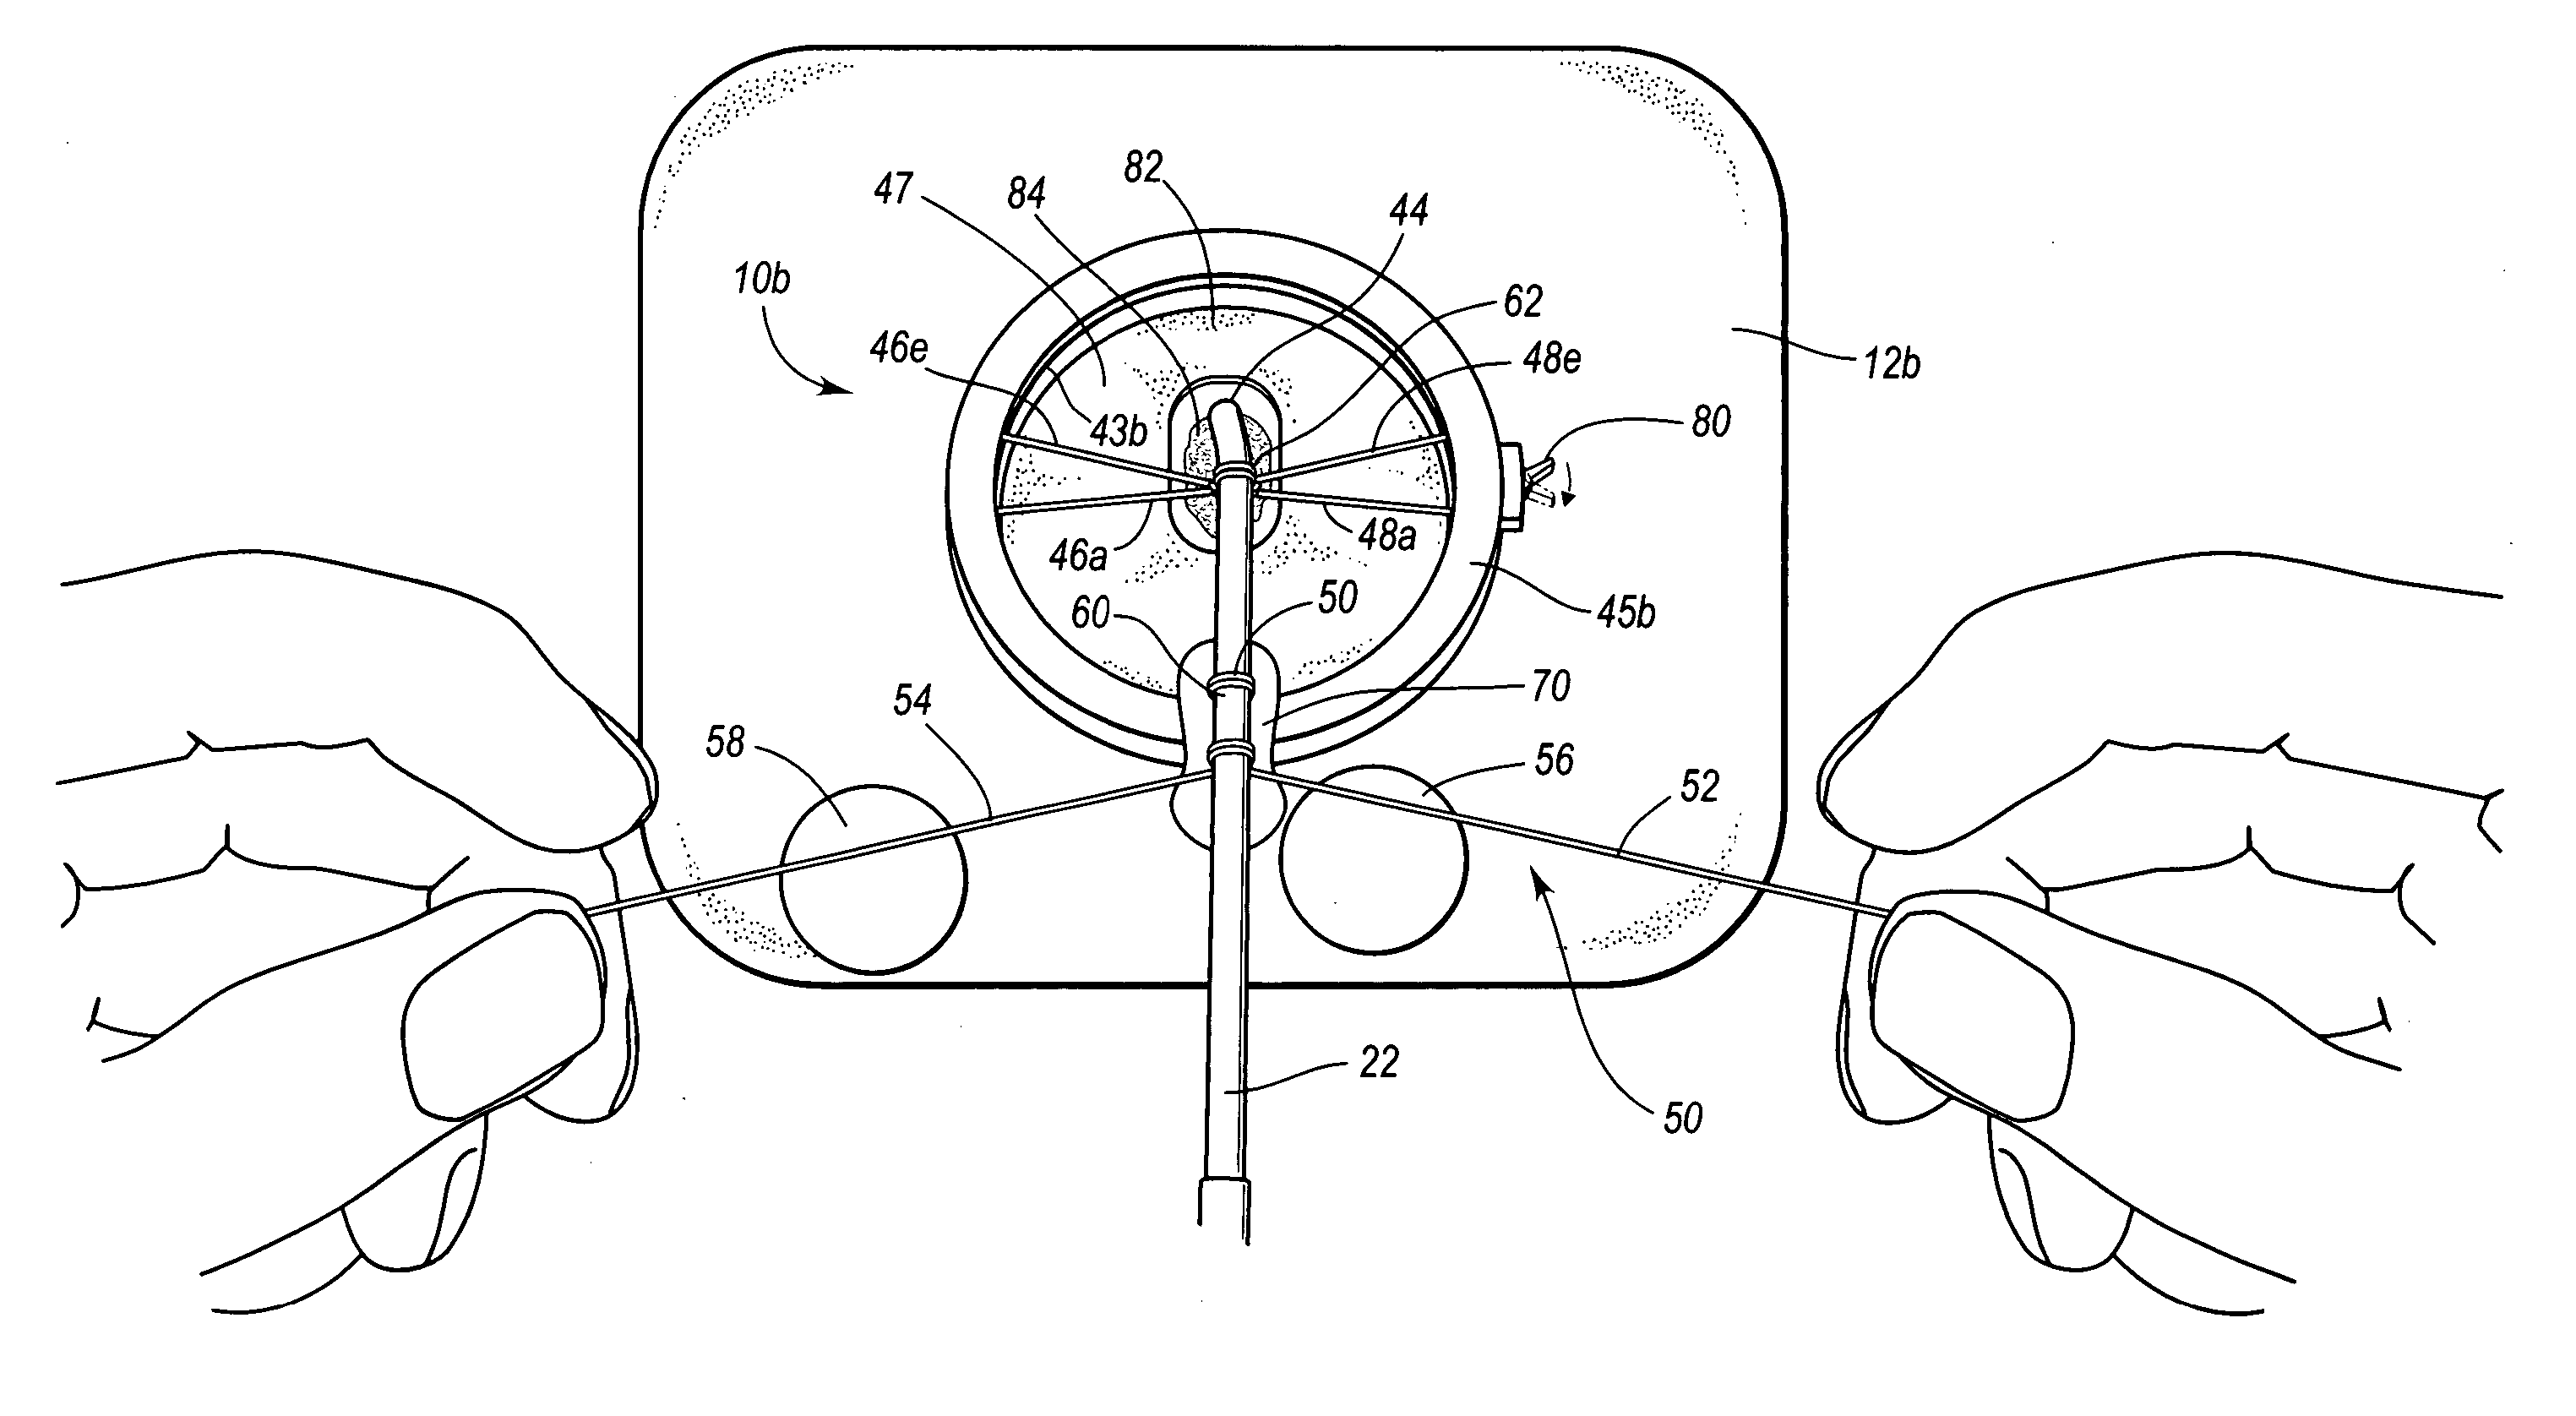 Self-suturing anchor device for a catheter